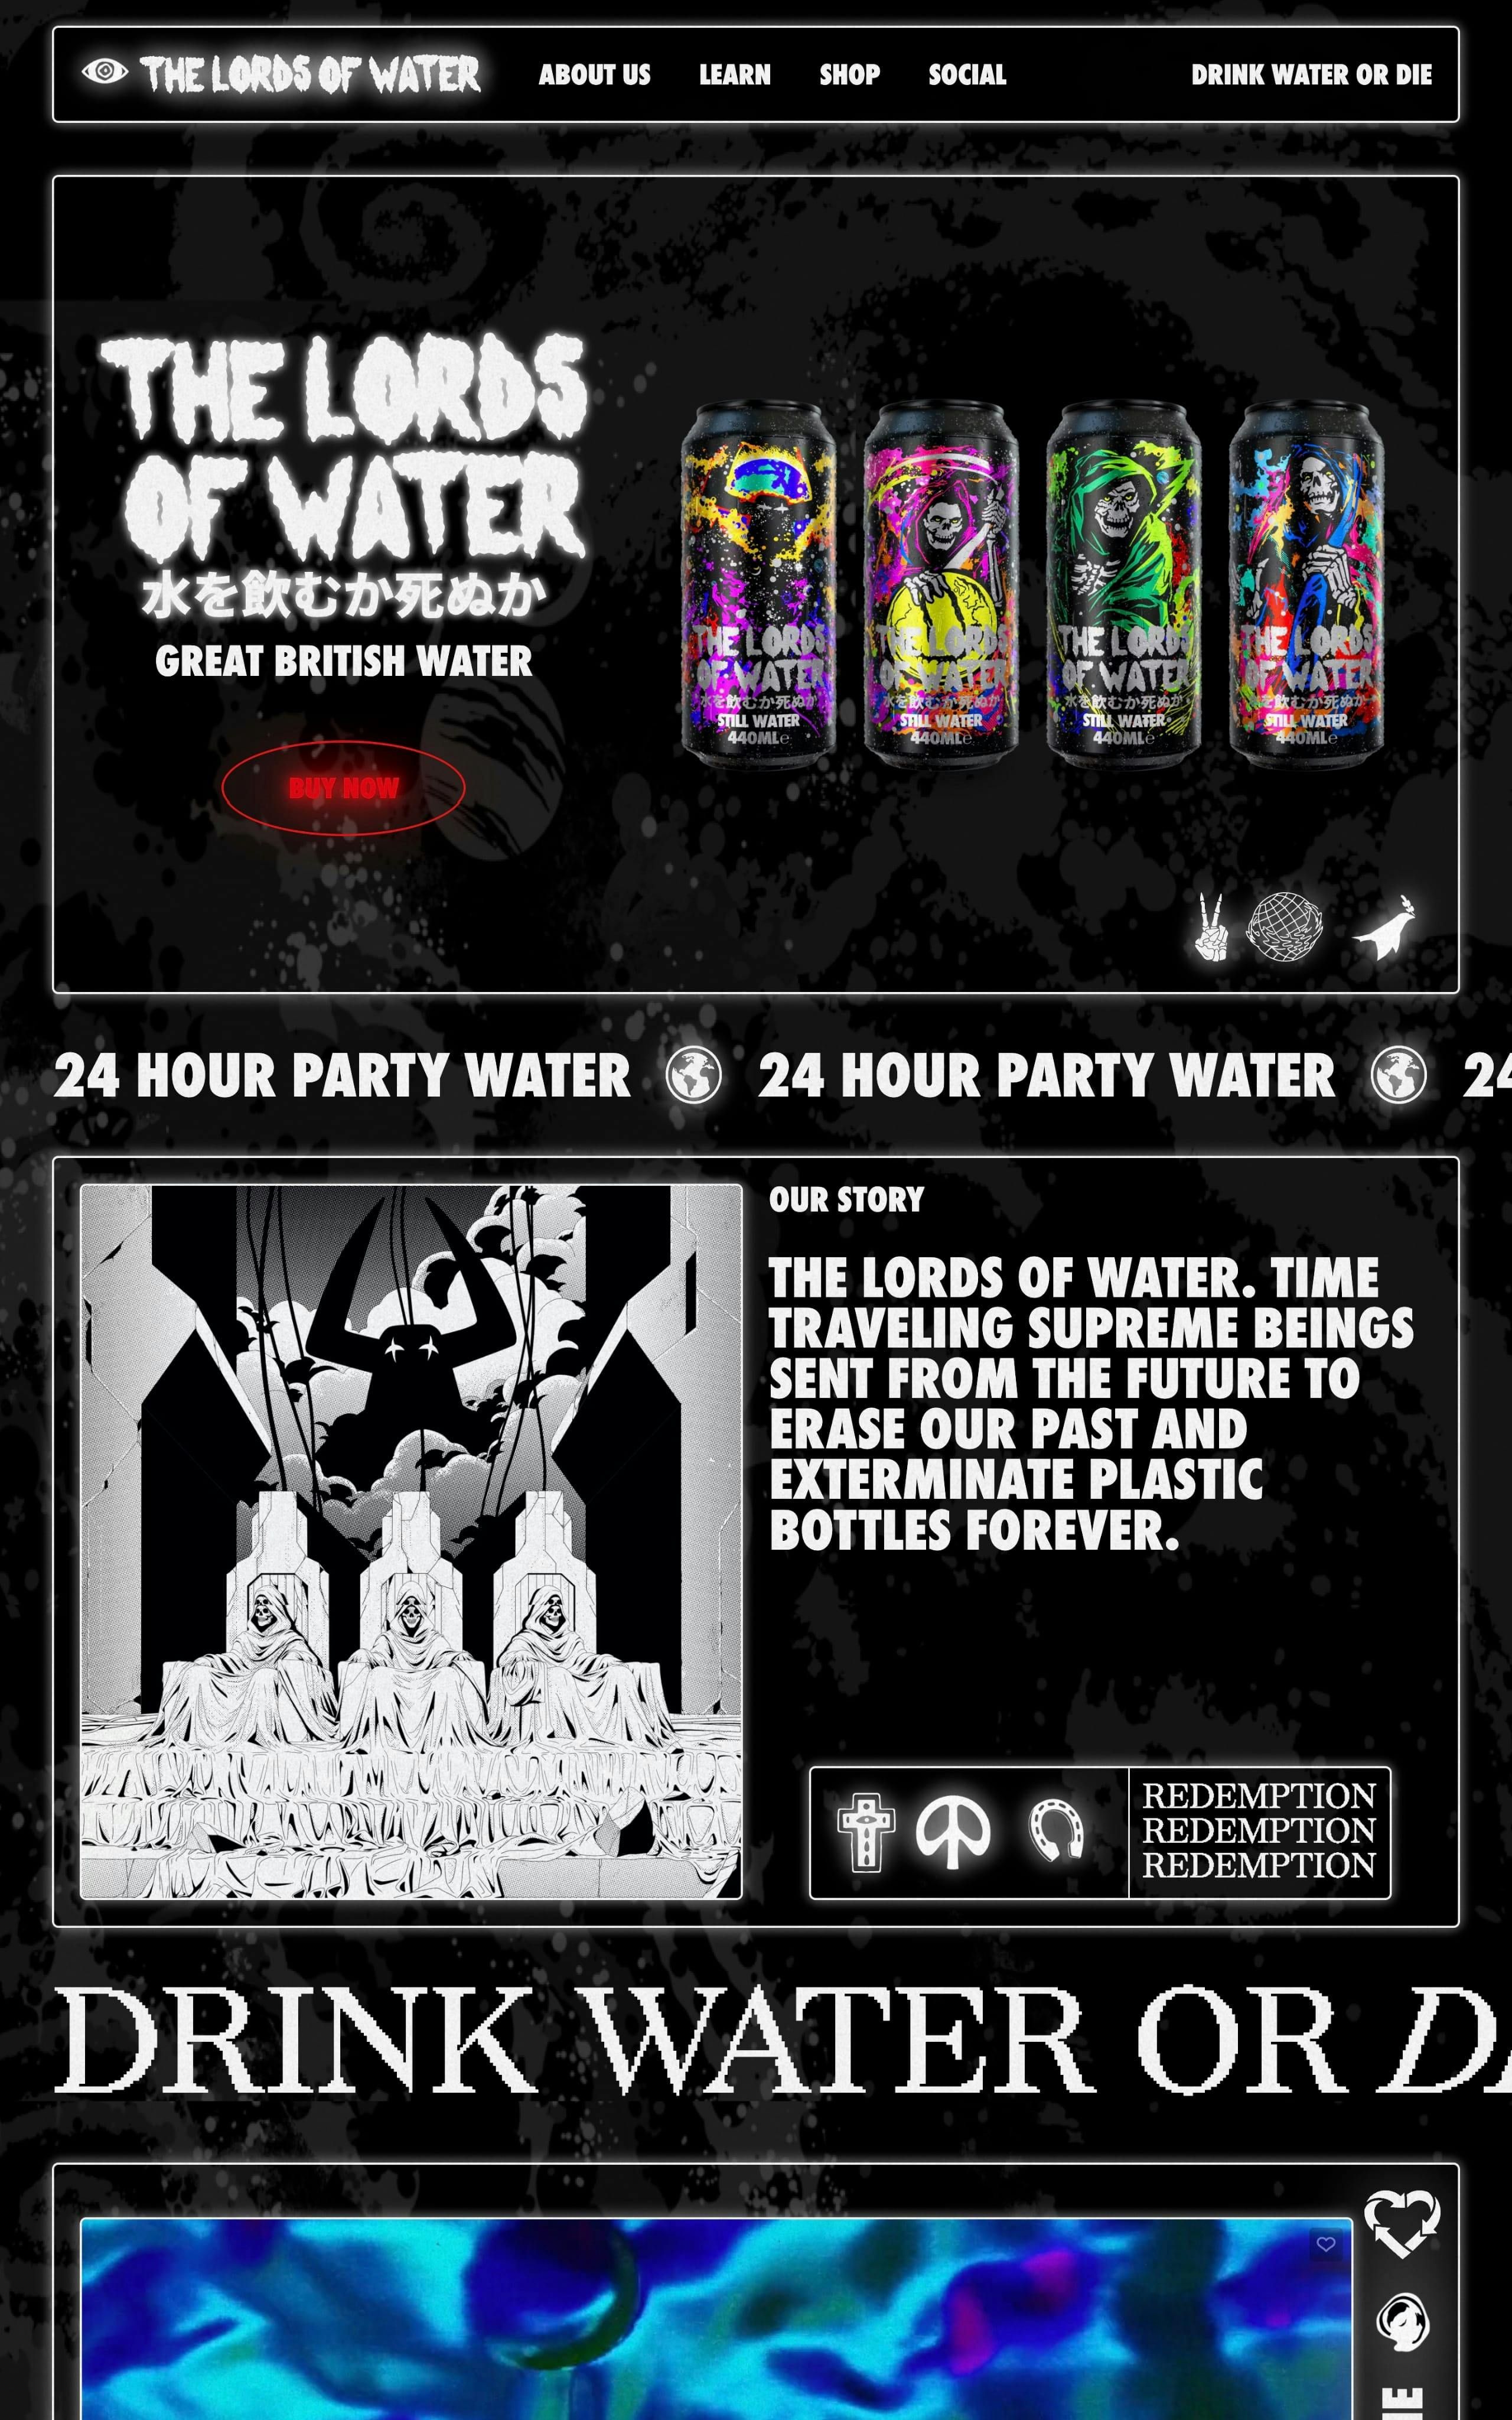 The Lords of Water Website Screenshot